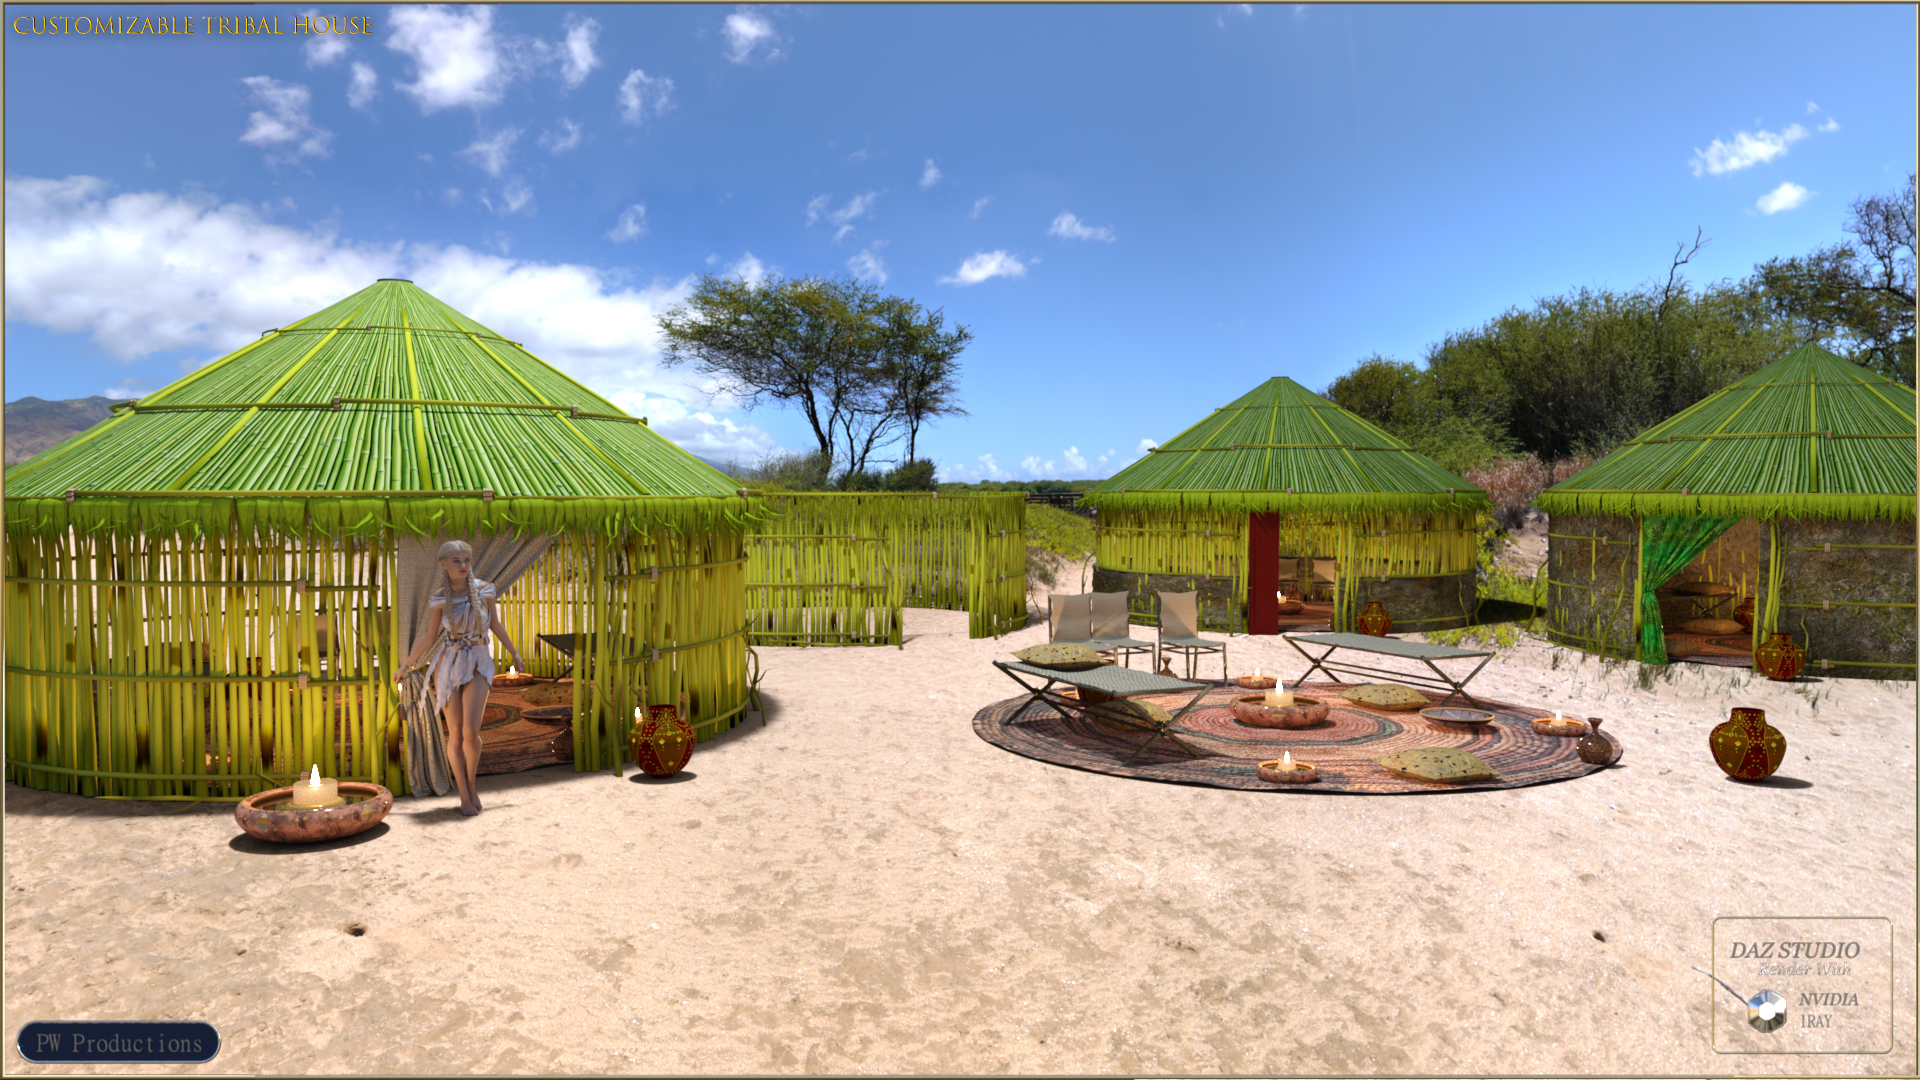 PW Customizable Tribal House by: PW Productions, 3D Models by Daz 3D